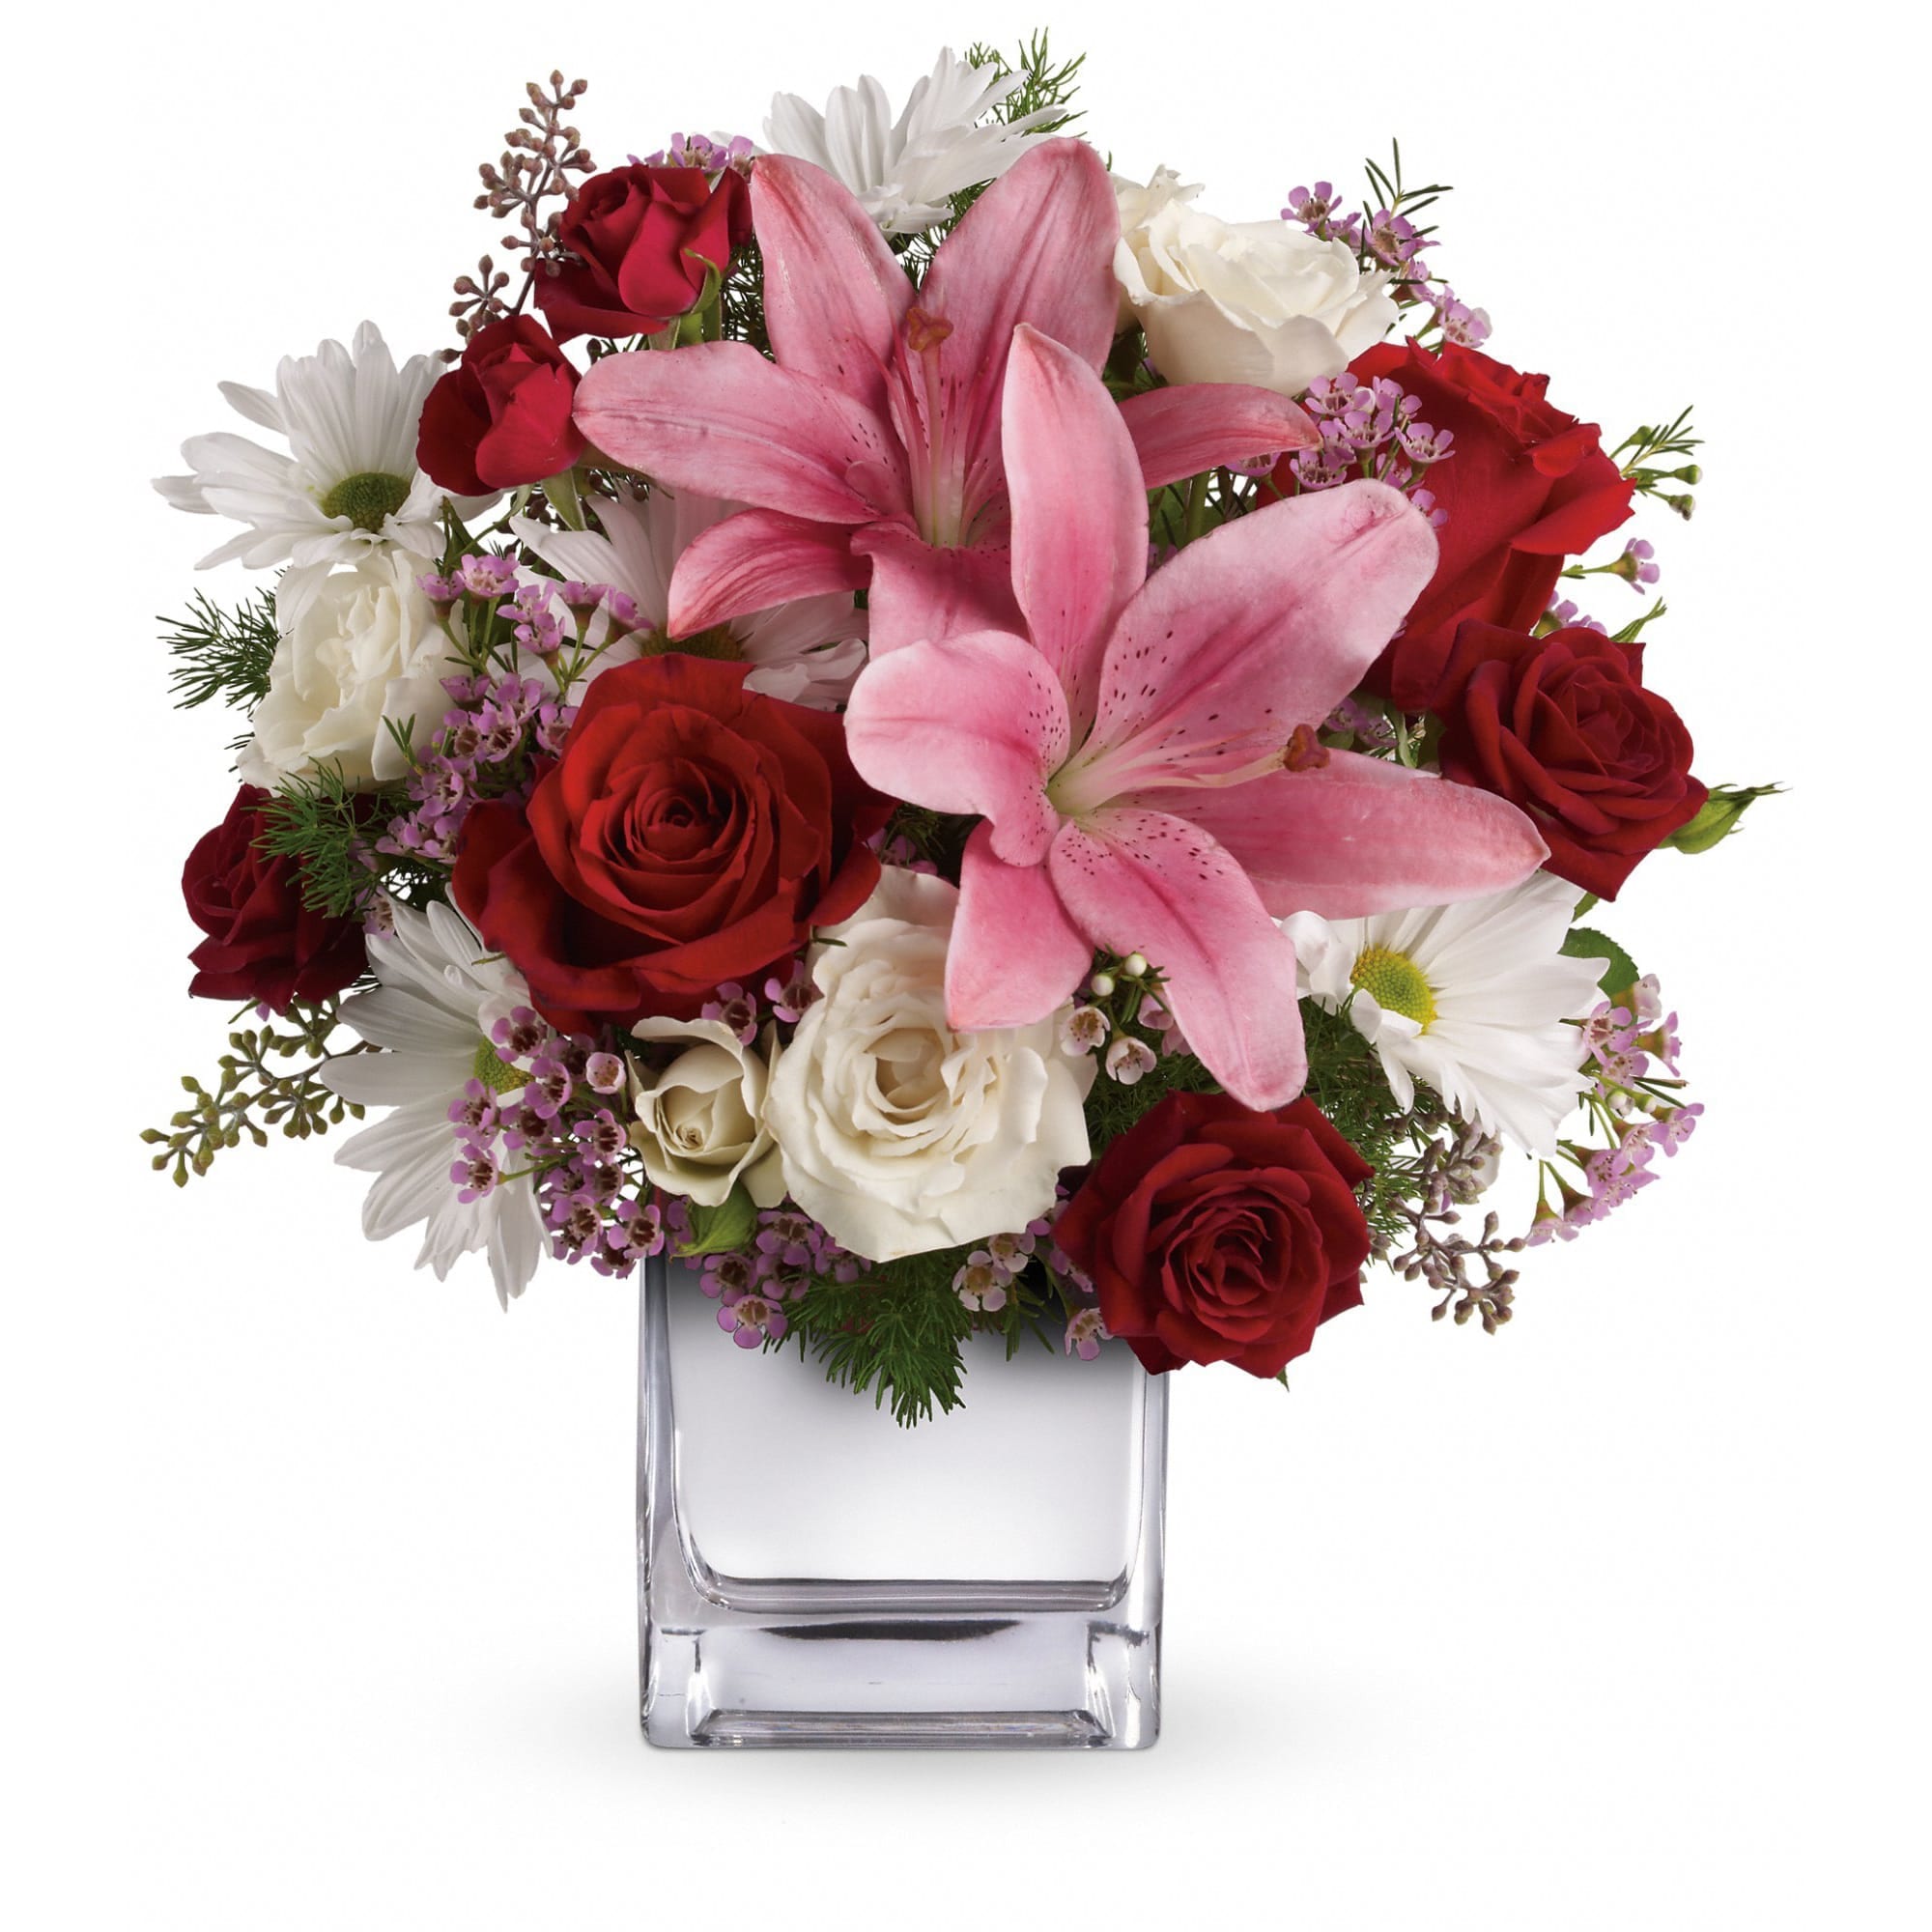 Teleflora's Happy in Love Bouquet - If you think she loves you now, wait till she receives this spectacularly chic bouquet of red roses, fragrant pink lilies and more in a dazzling mirrored silver cube. She'll love the flowers, the stylish cube, and most of all, her one and only. 